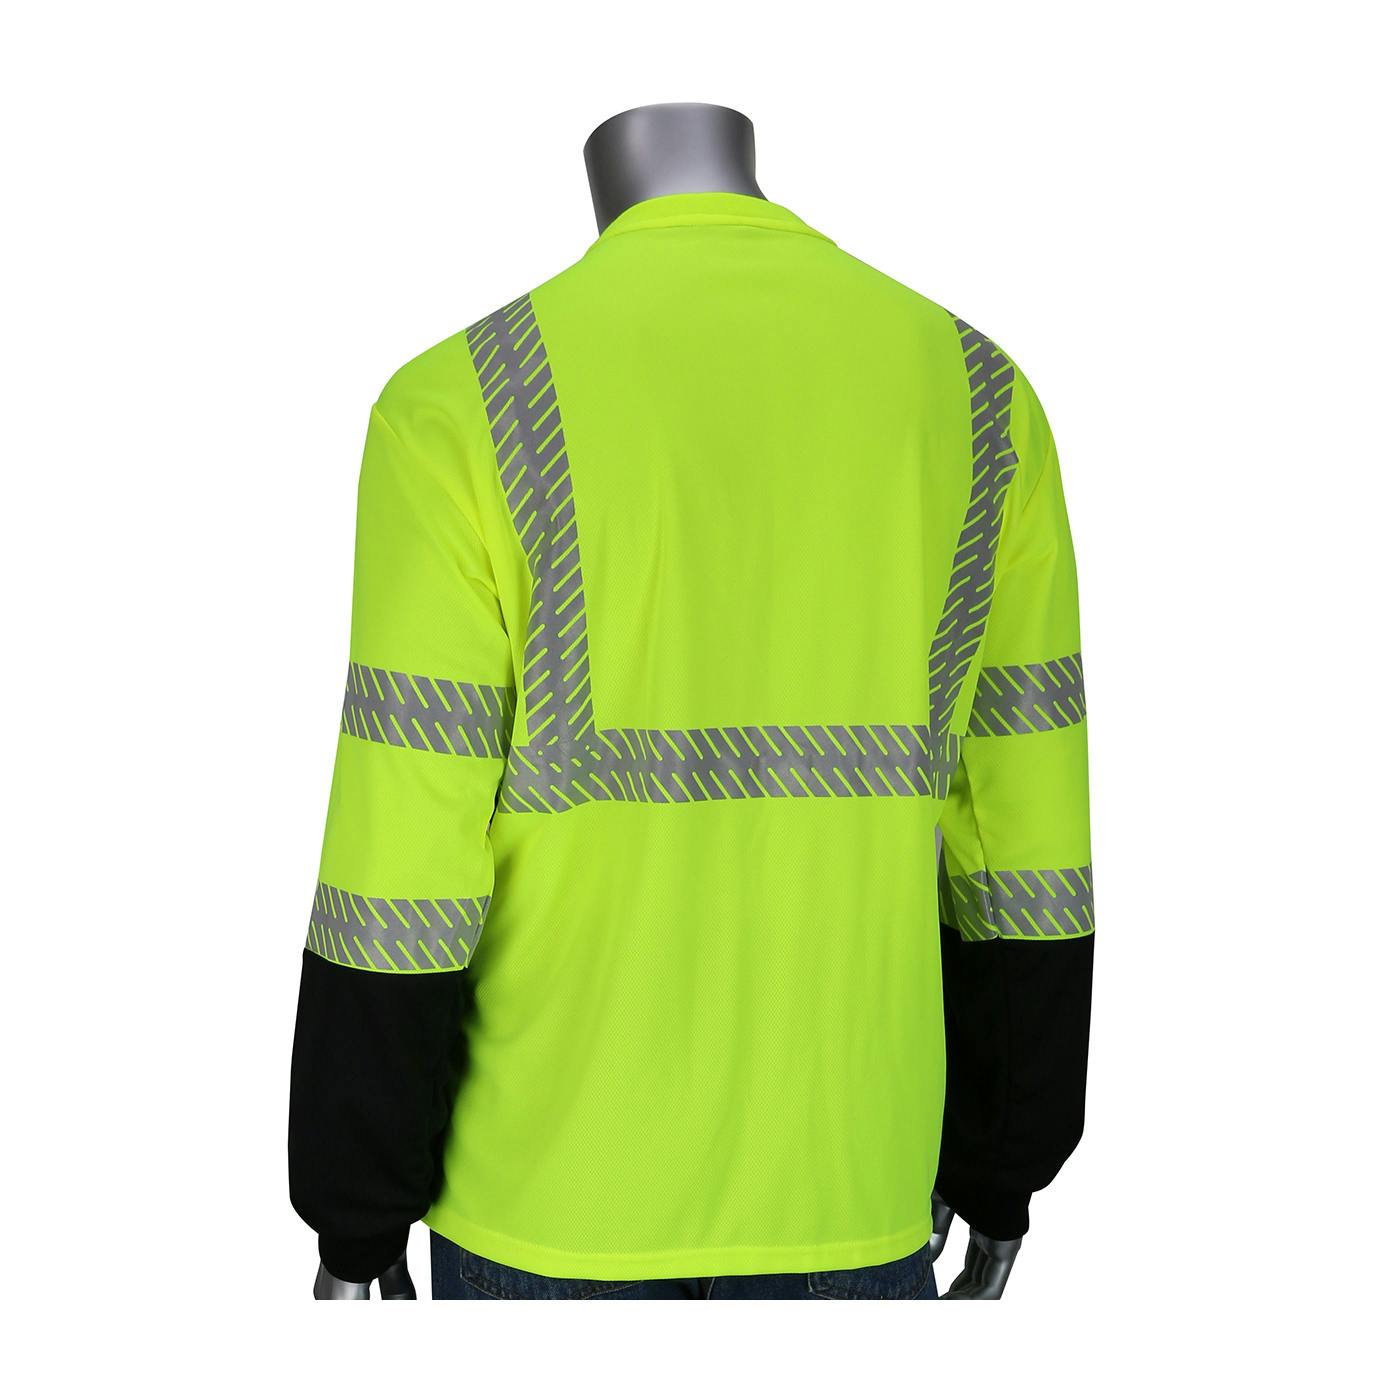 ANSI Type R Class 3 Long Sleeve T-Shirt with 50+ UPF Sun Protection, Built-in Insect Repellent and Black Bottom Front, Hi-Vis Yellow (313-1375B)_0